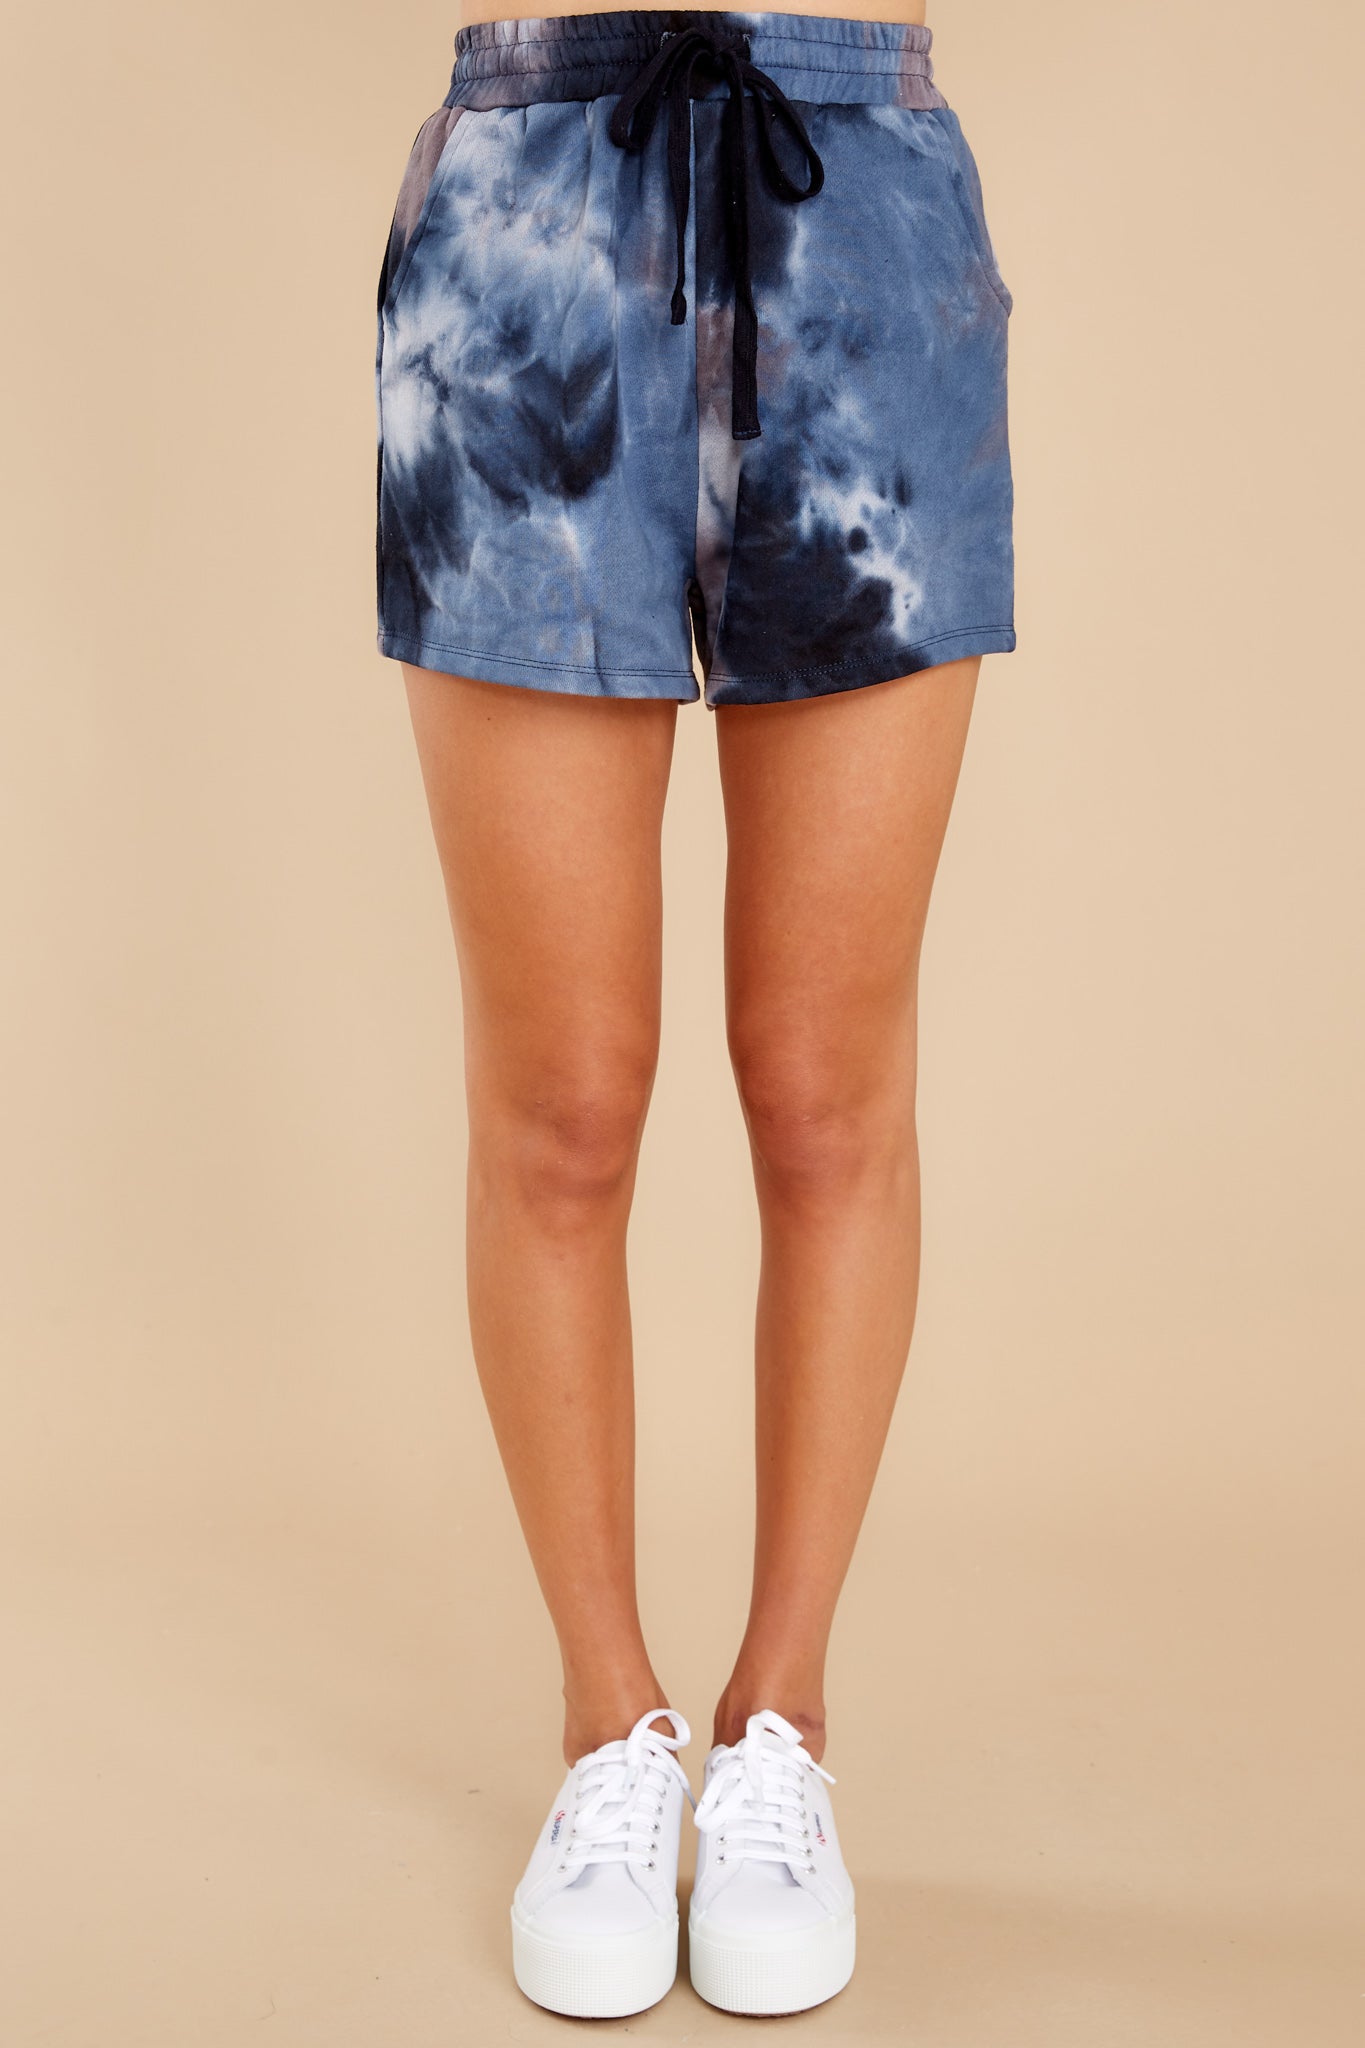 3 Here With Me Navy And Ash Tie Dye Shorts at reddress.com